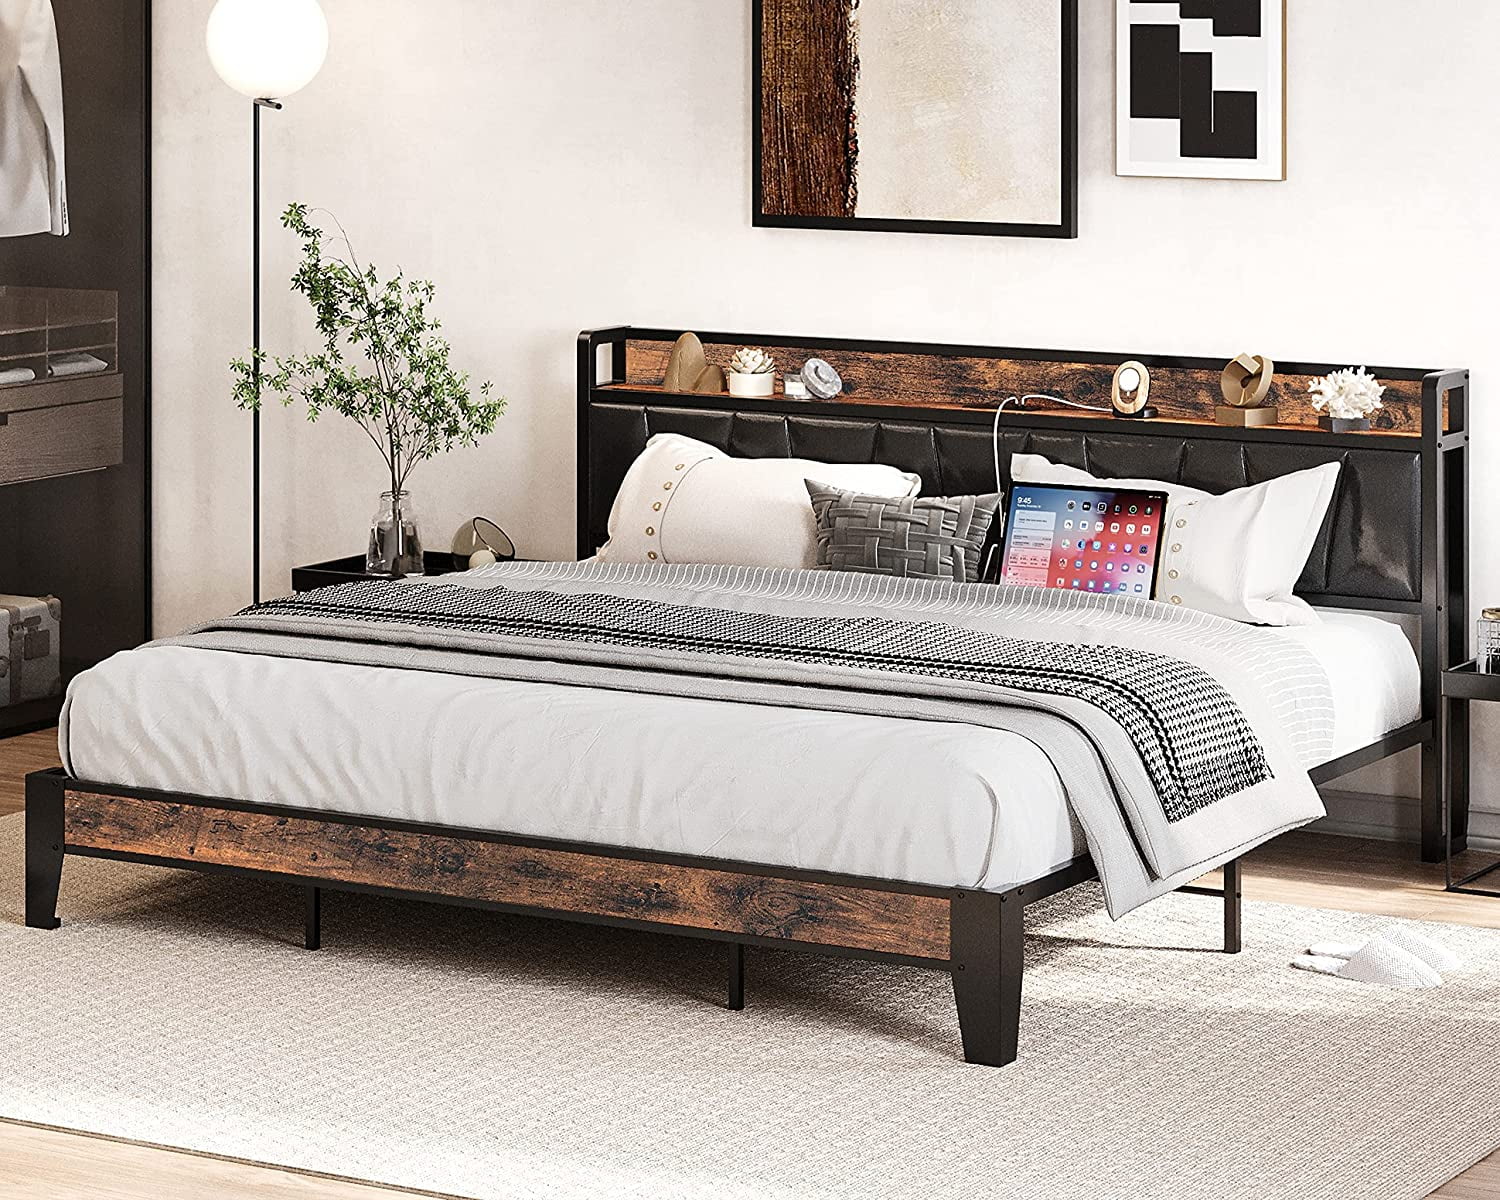 LIKIMIO King Metal Bed Frame with Black Storage Headboard for Adults ...